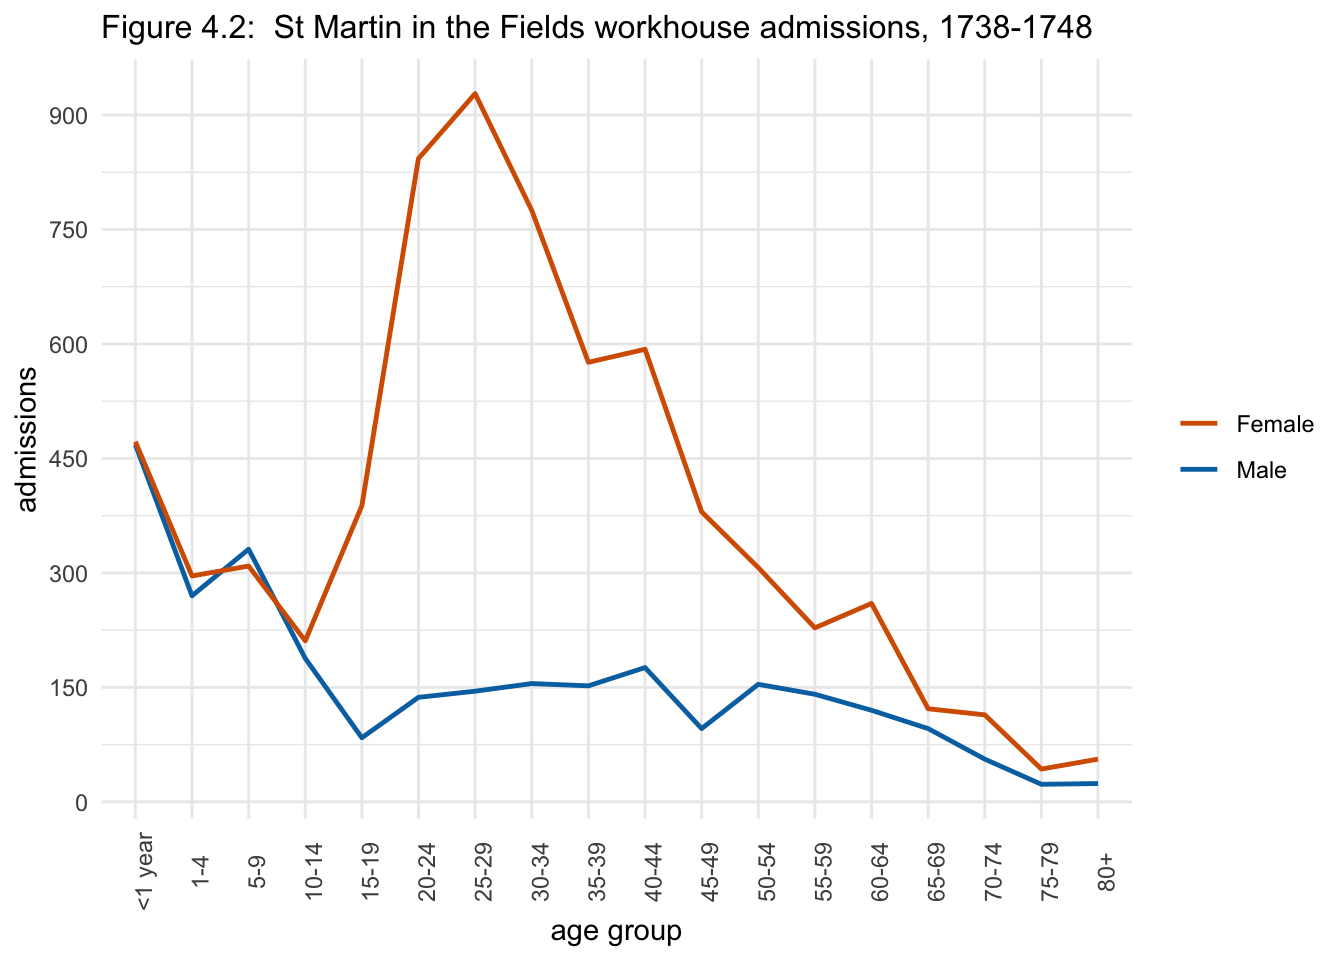 Figure 4.2:  St Martin in the Fields workhouse admissions, 1738-1748.